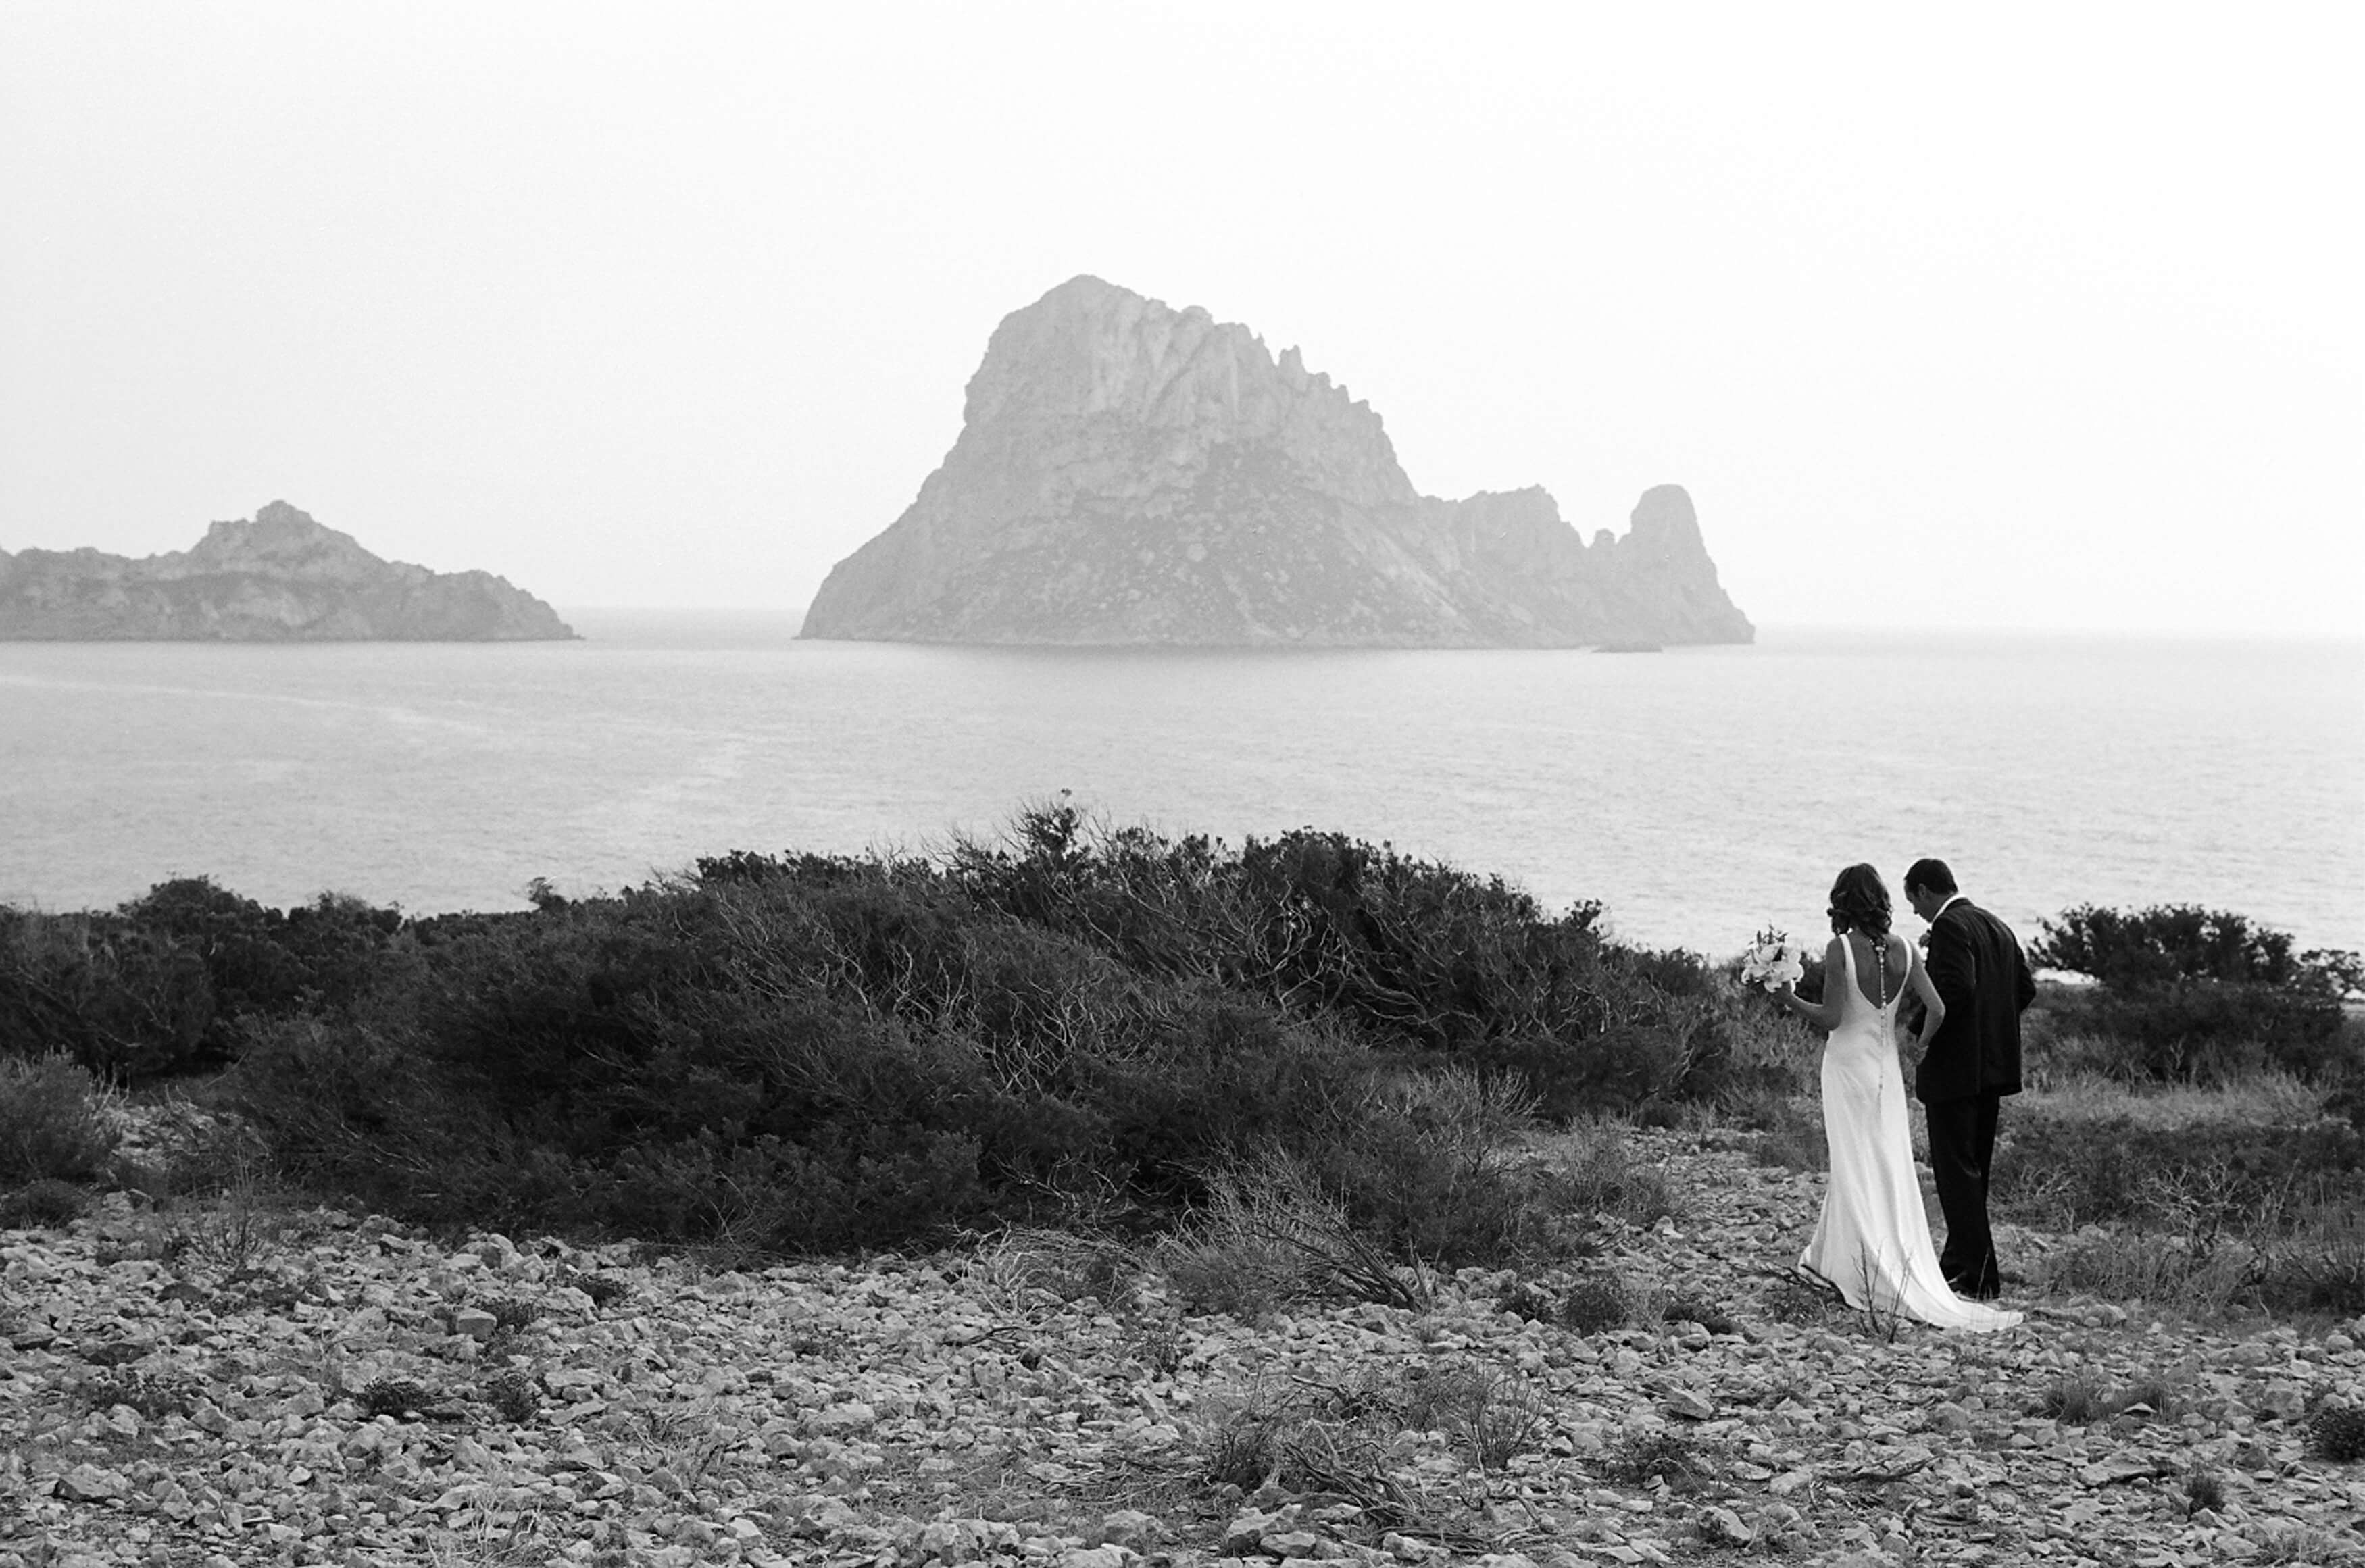 Bride and Groom on Ibiza wedding over looking Es Vedra Black and White analofg photo